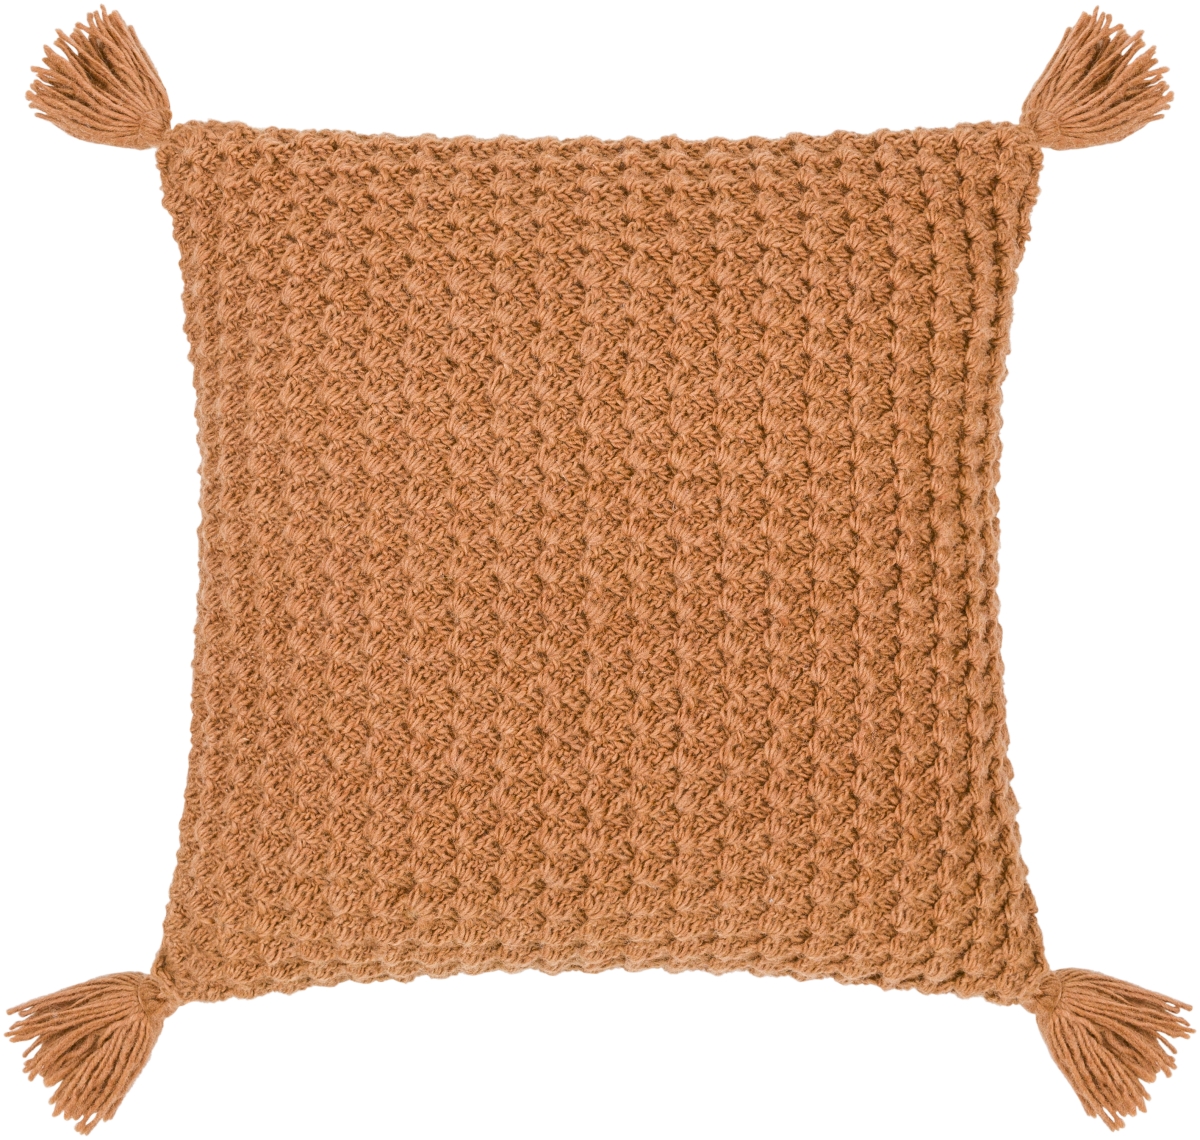 Picture of Livabliss MKO023-2020 20 x 20 in. Makrome Square Pillow Cover